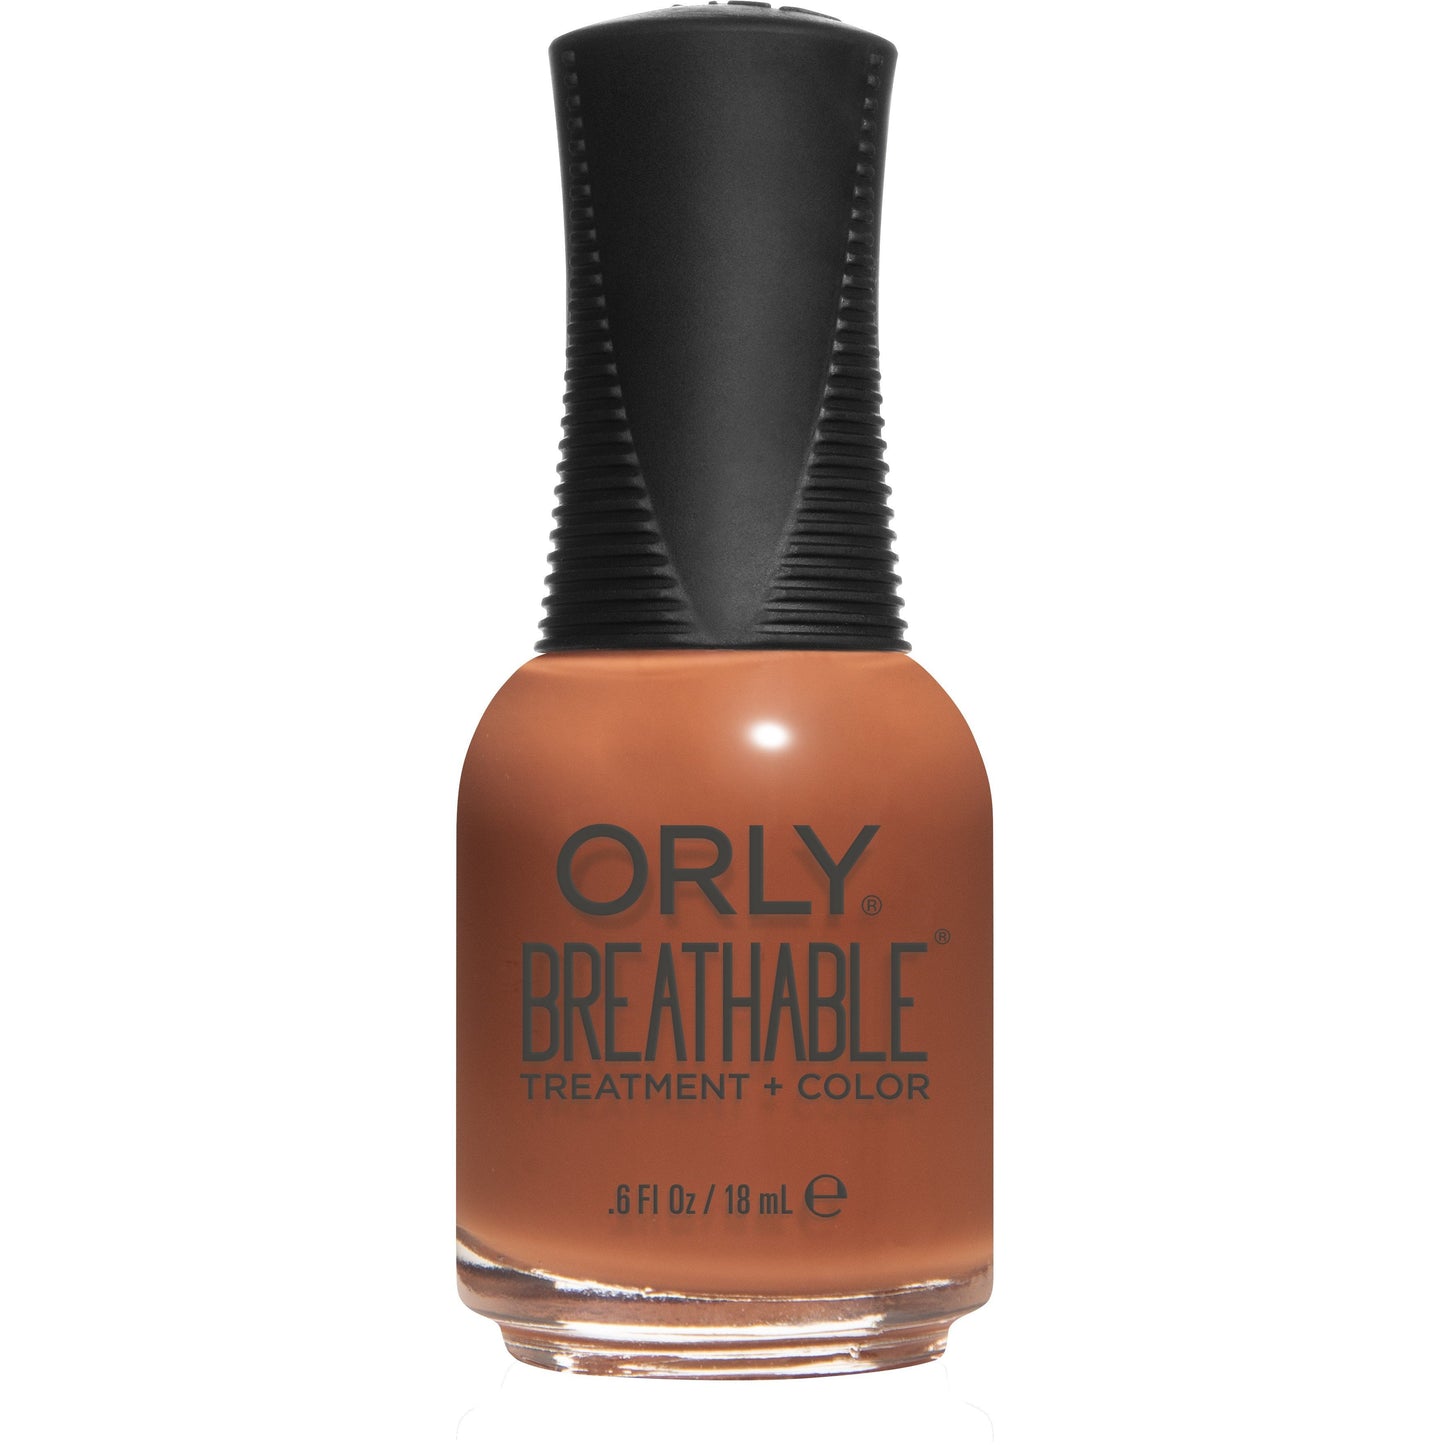 orly breathable nail polish, Sunkissed 2010010 Classique Nails Beauty Supply Inc.